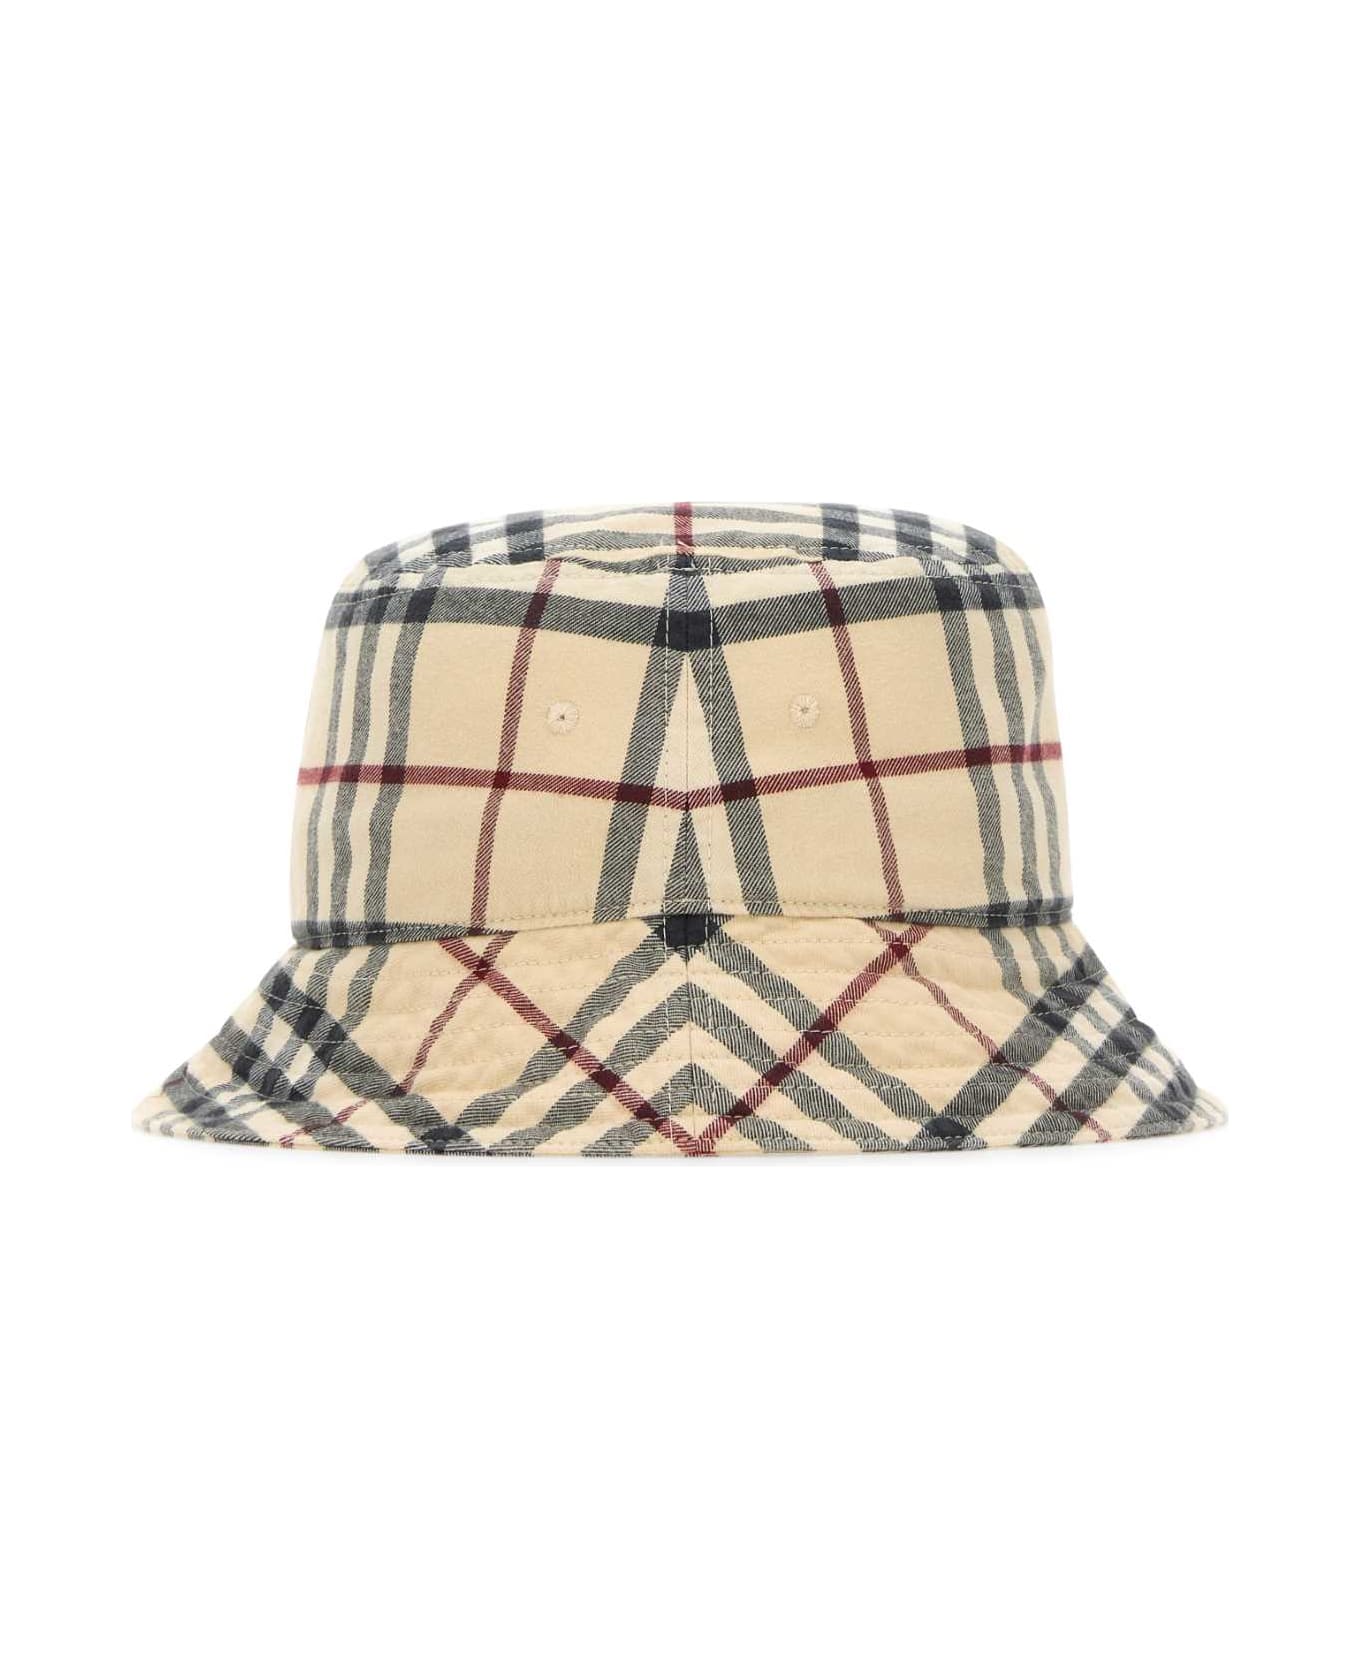 Burberry Embroidered Cotton Bucket Hat - STONE